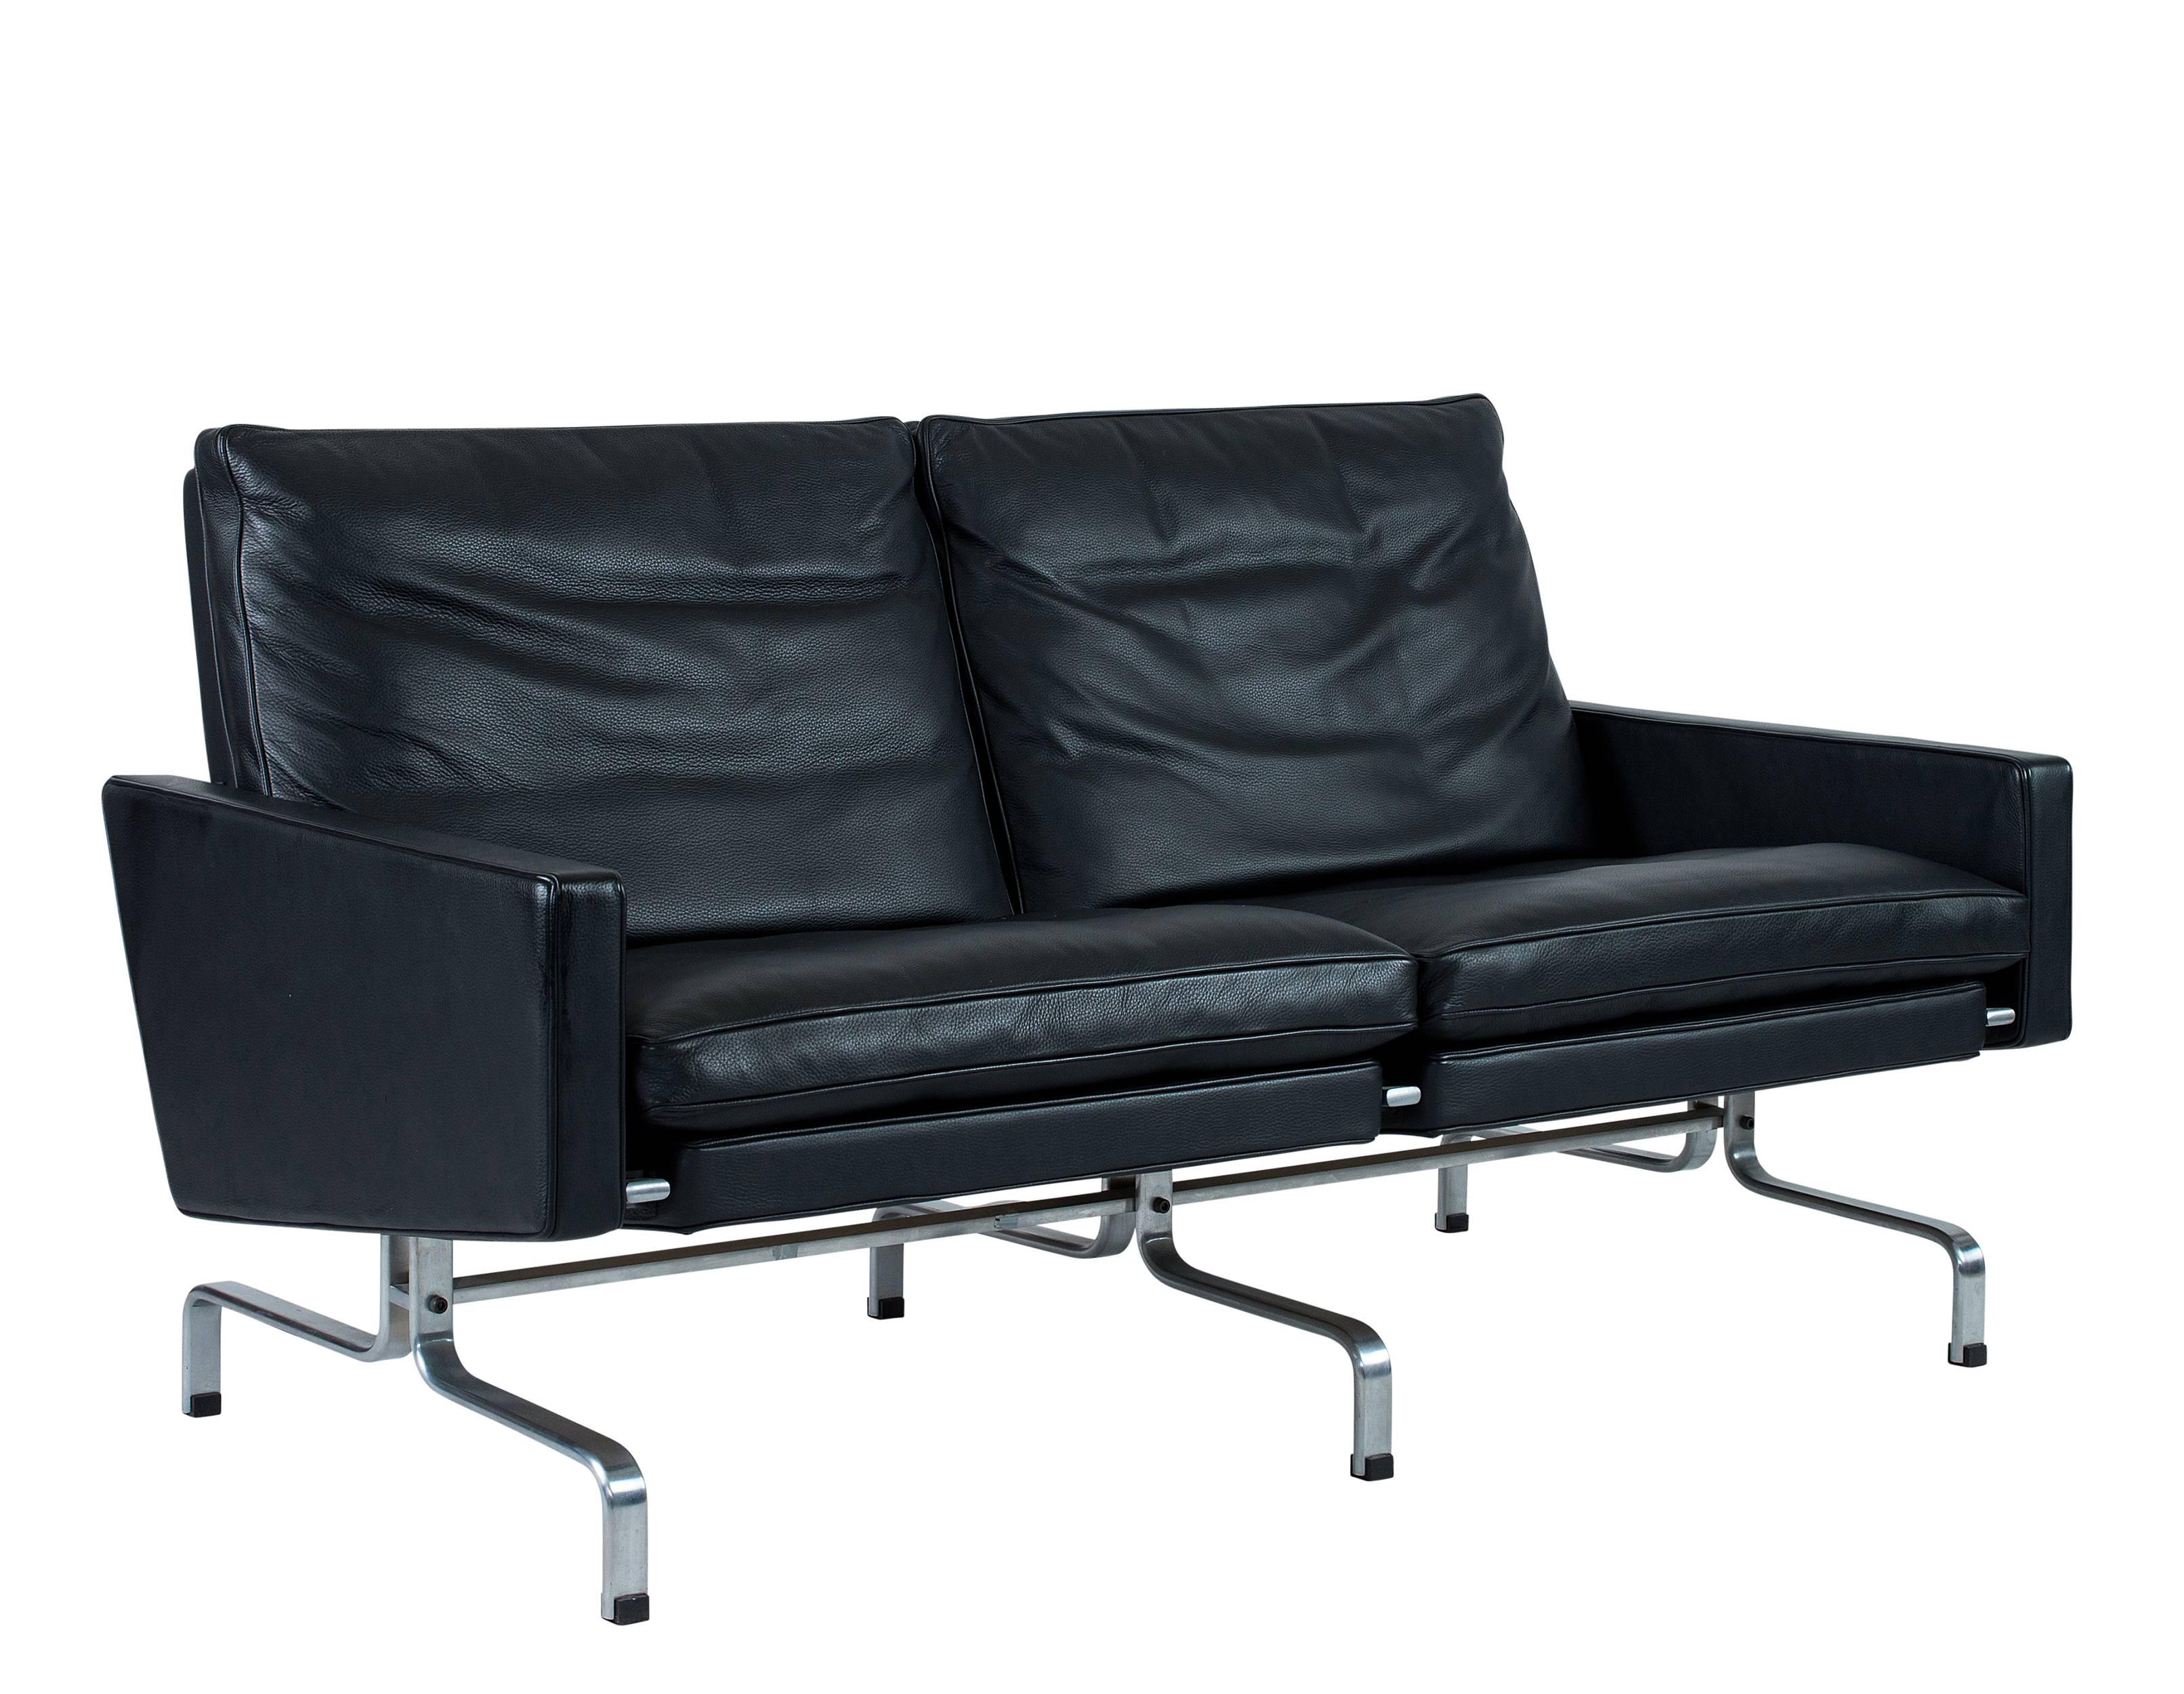 Poul Kjaerholm PK31 two-seat sofa designed in 1958 and produced by Fritz Hansen in 2007.